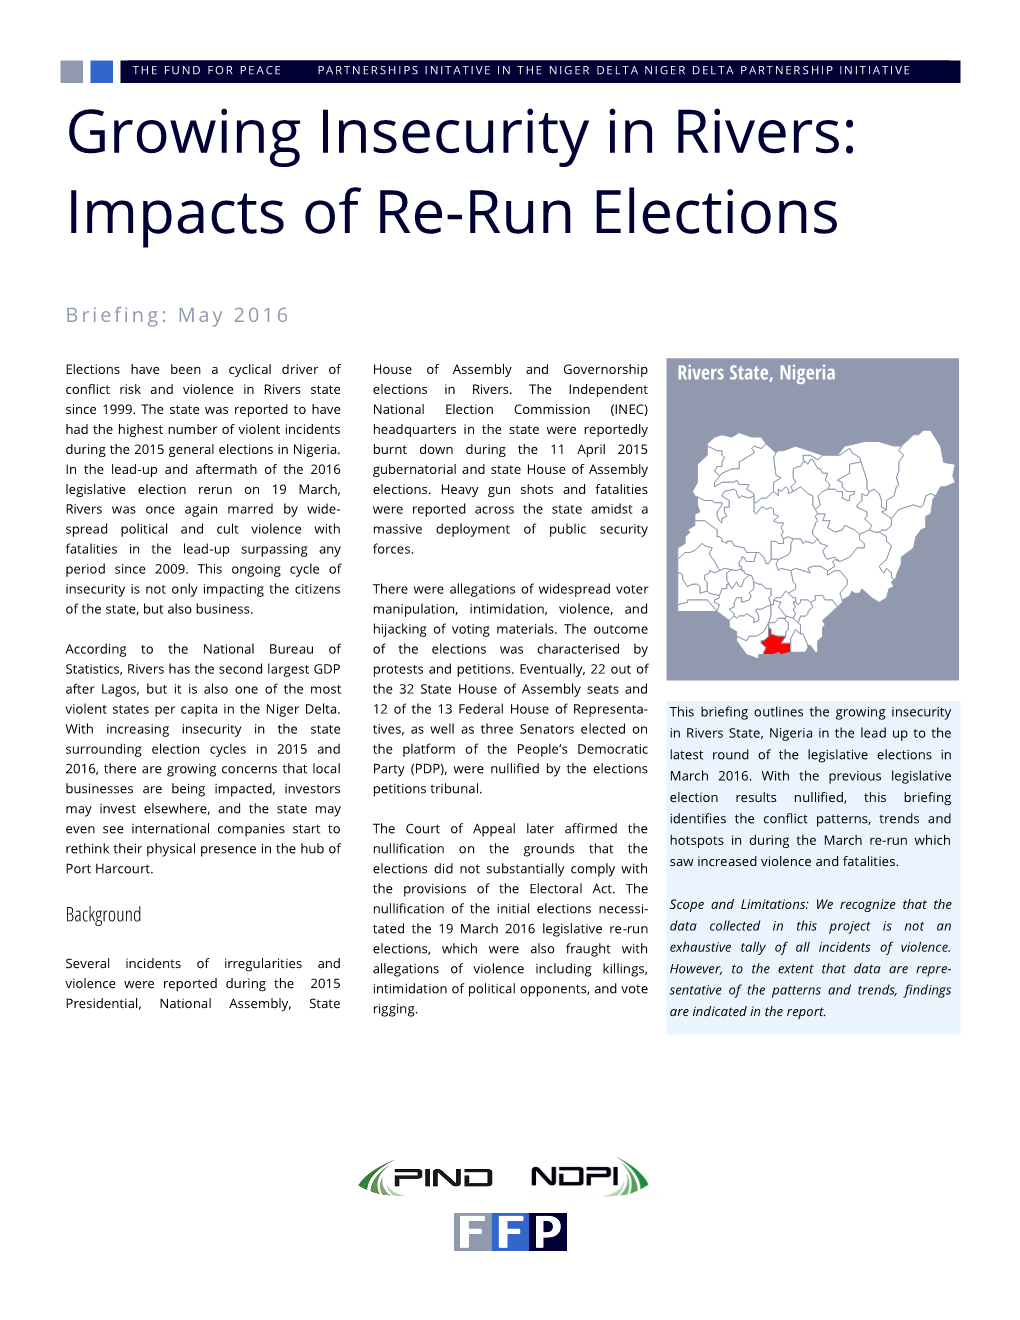 Growing Insecurity in Rivers: Impacts of Re-Run Elections